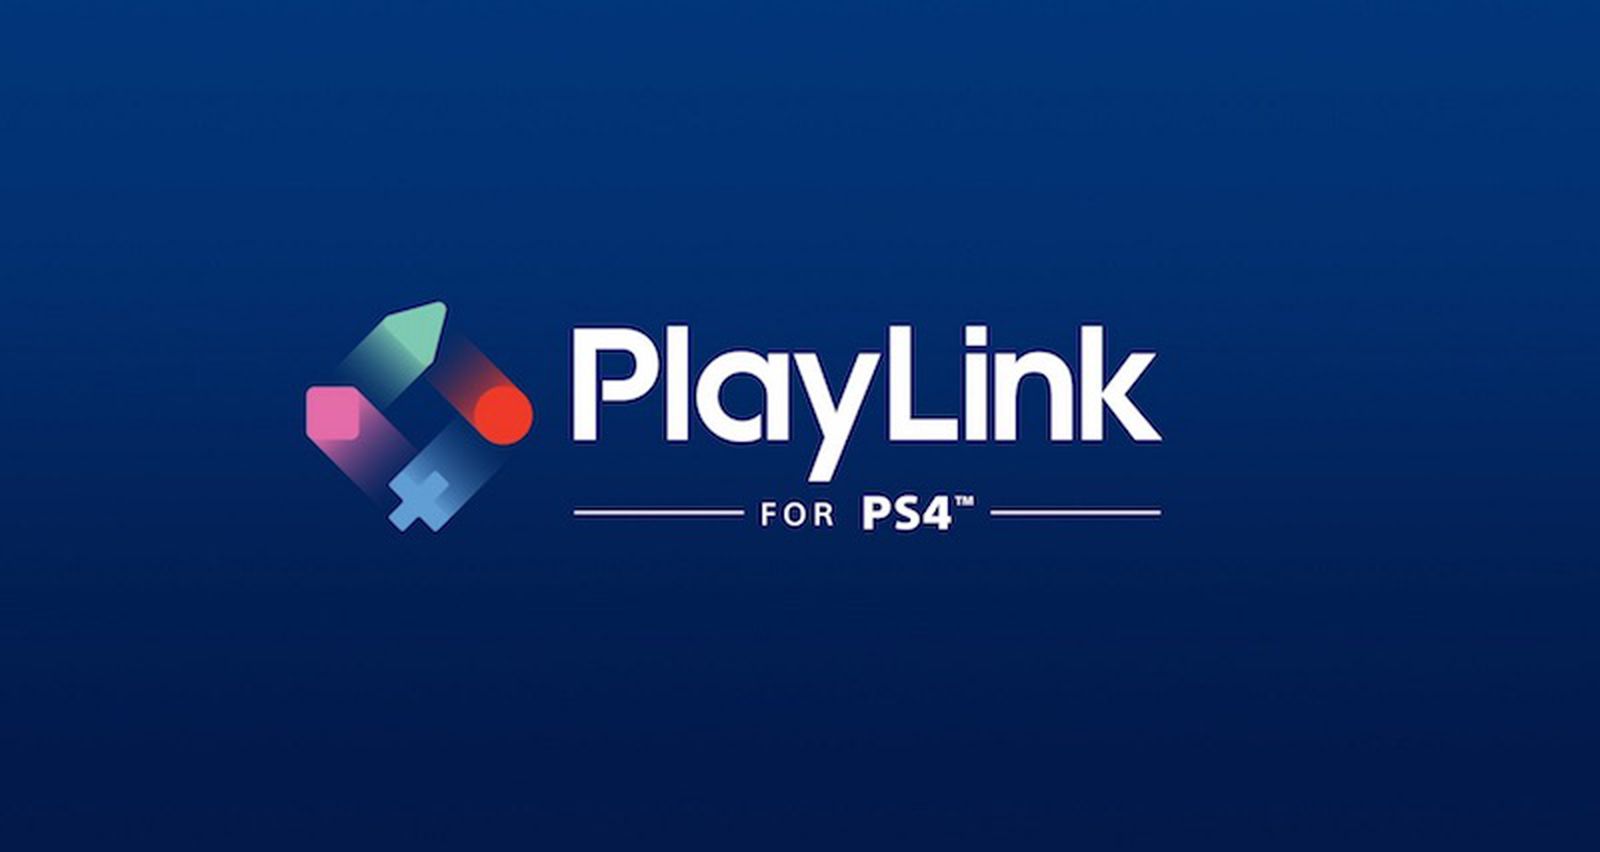 compromis Machtigen fontein Sony Announces 'PlayLink' With Synchronous Multiplayer Games Communicating  Between PS4 and iOS - MacRumors